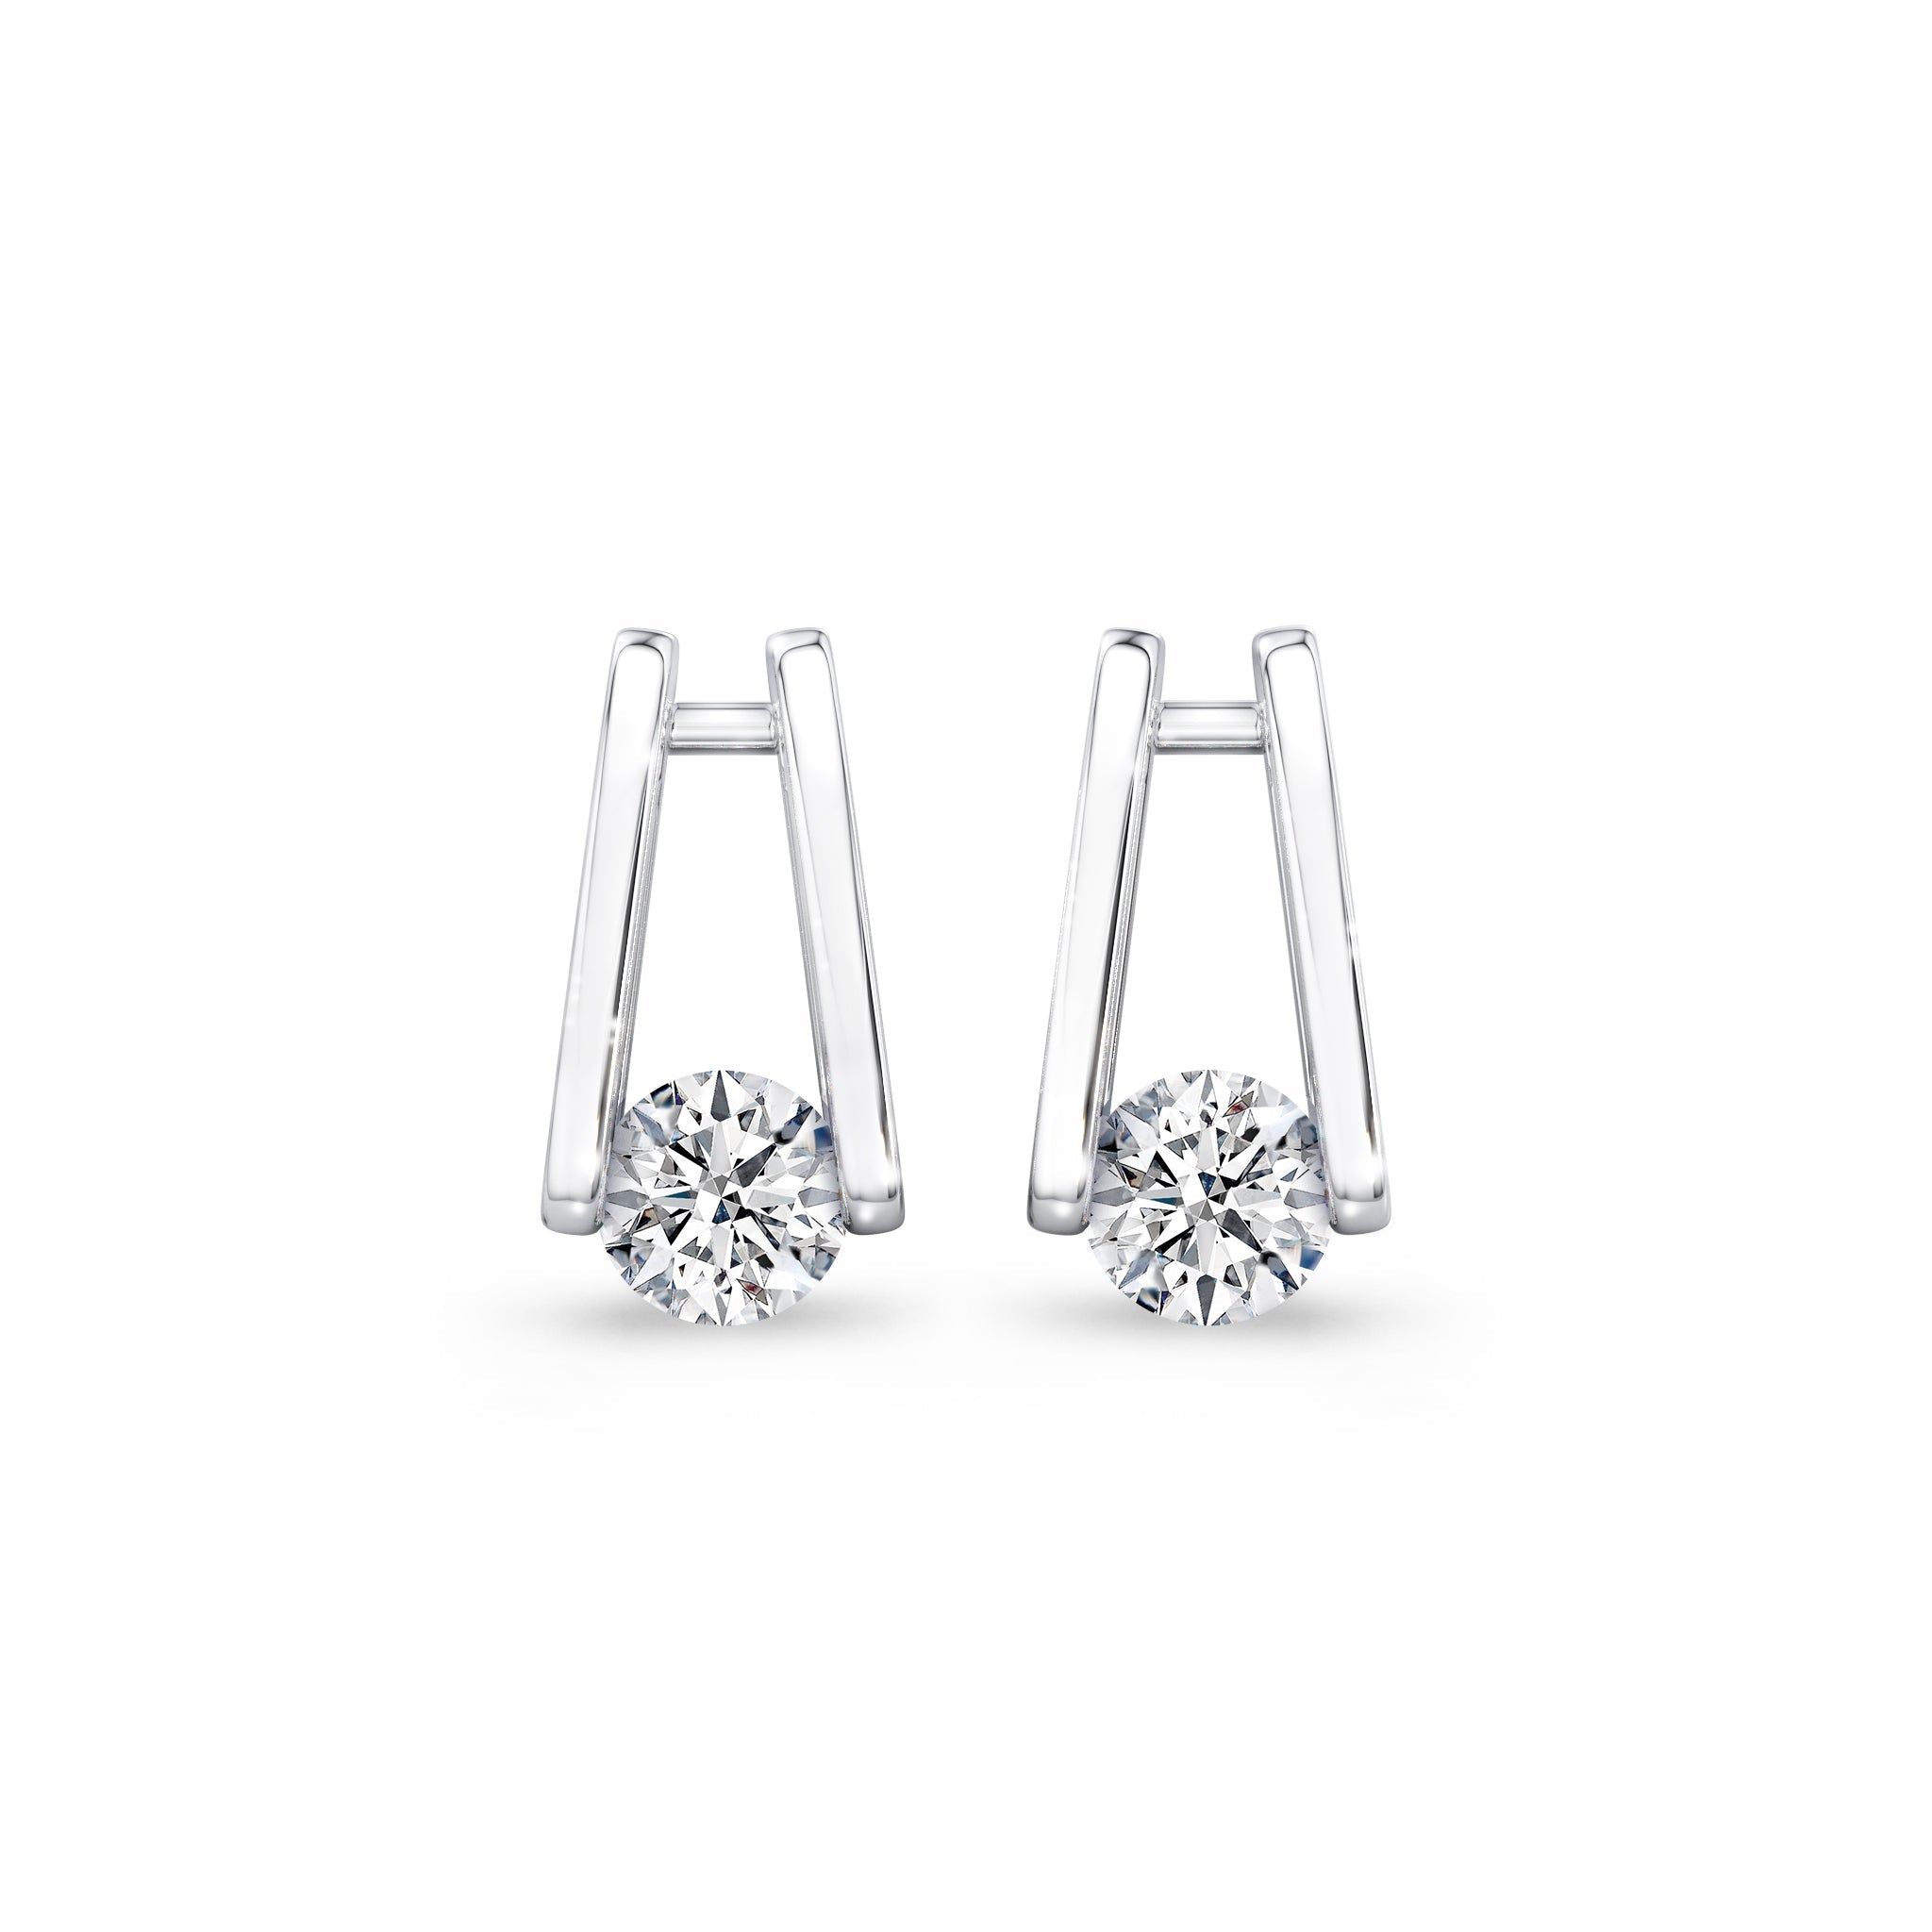 Millennium Classic Diamond Stud Earrings 0.30 Carat in 18K White Gold Front View